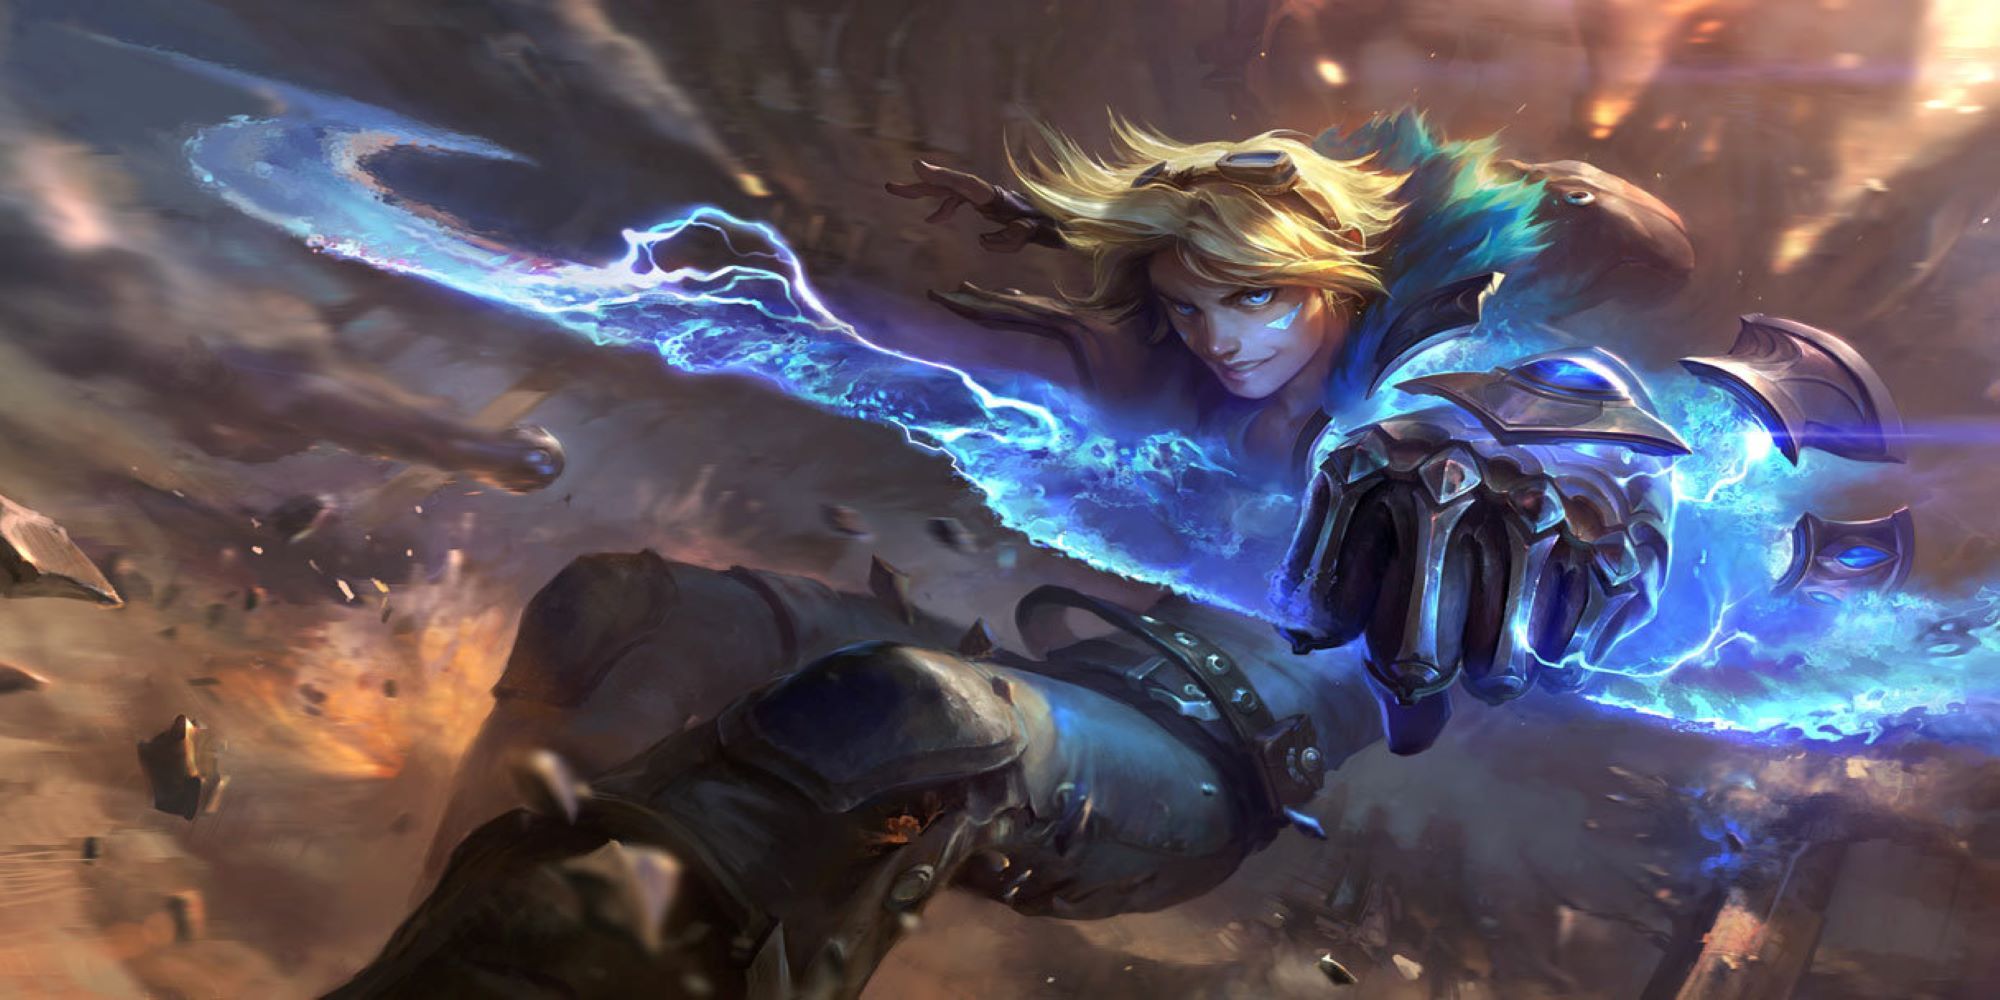 Ezreal The Wandering Explorer from League of Legends